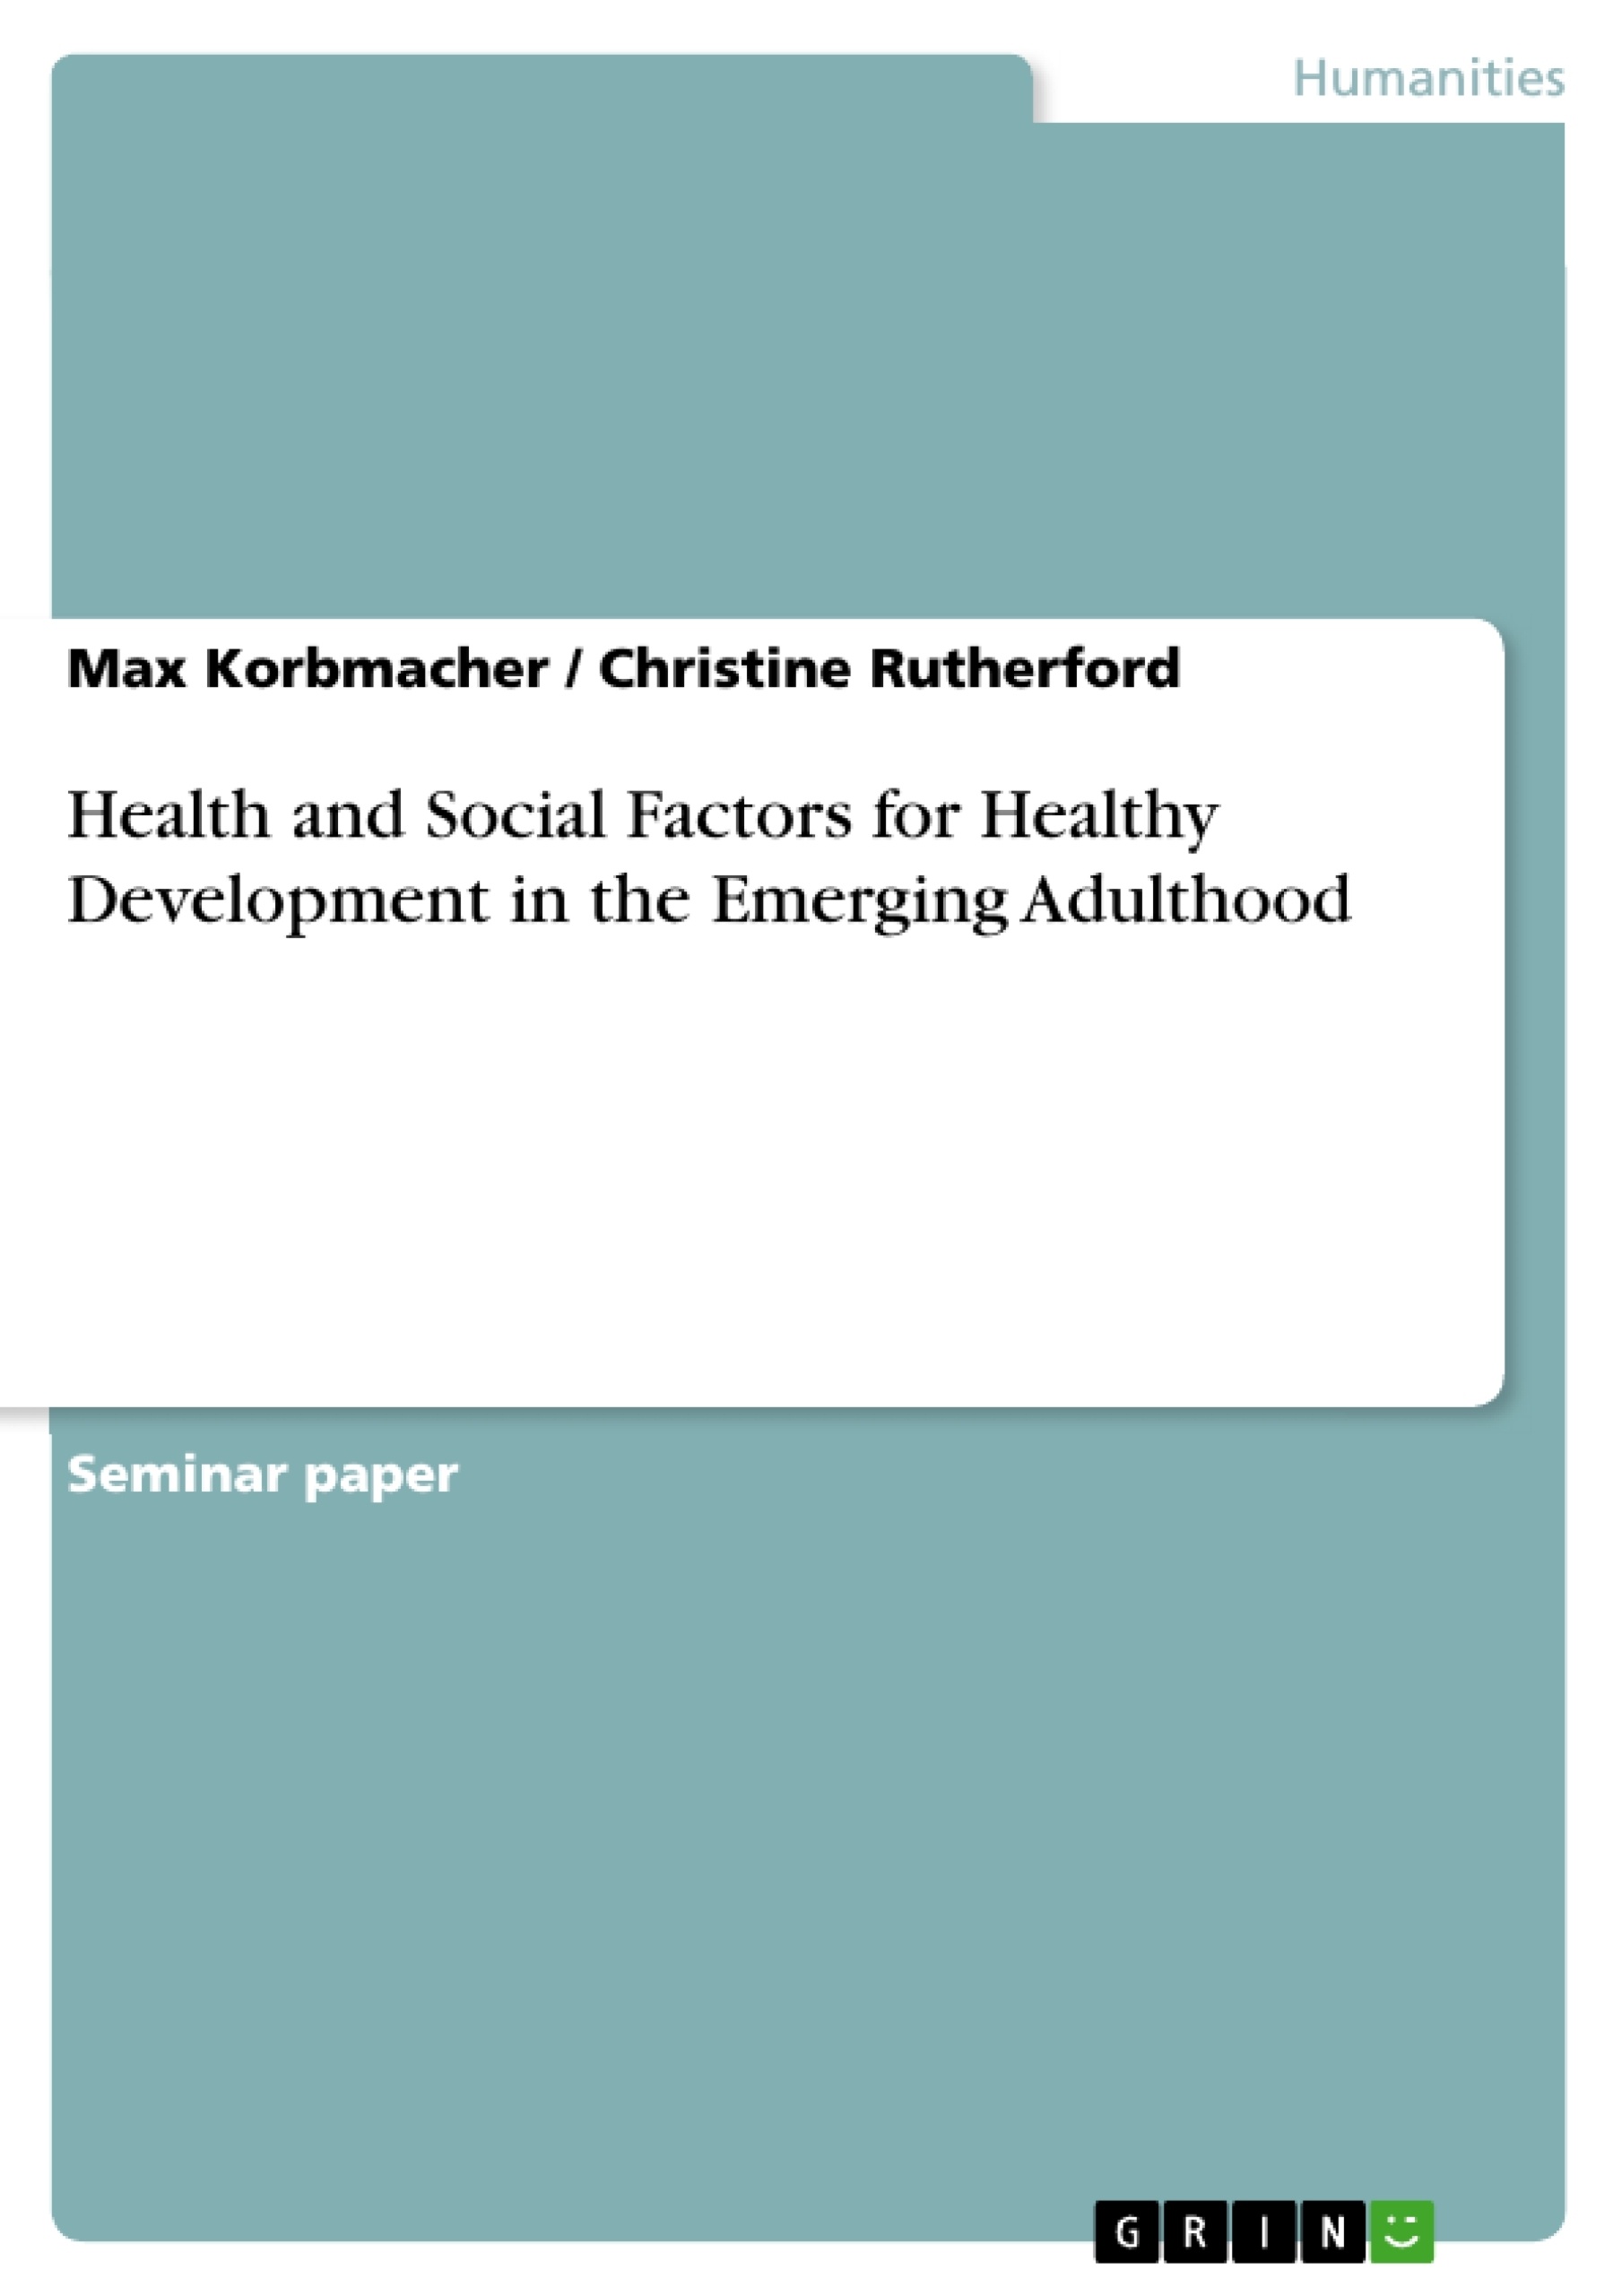 Título: Health and Social Factors for Healthy Development in the Emerging Adulthood